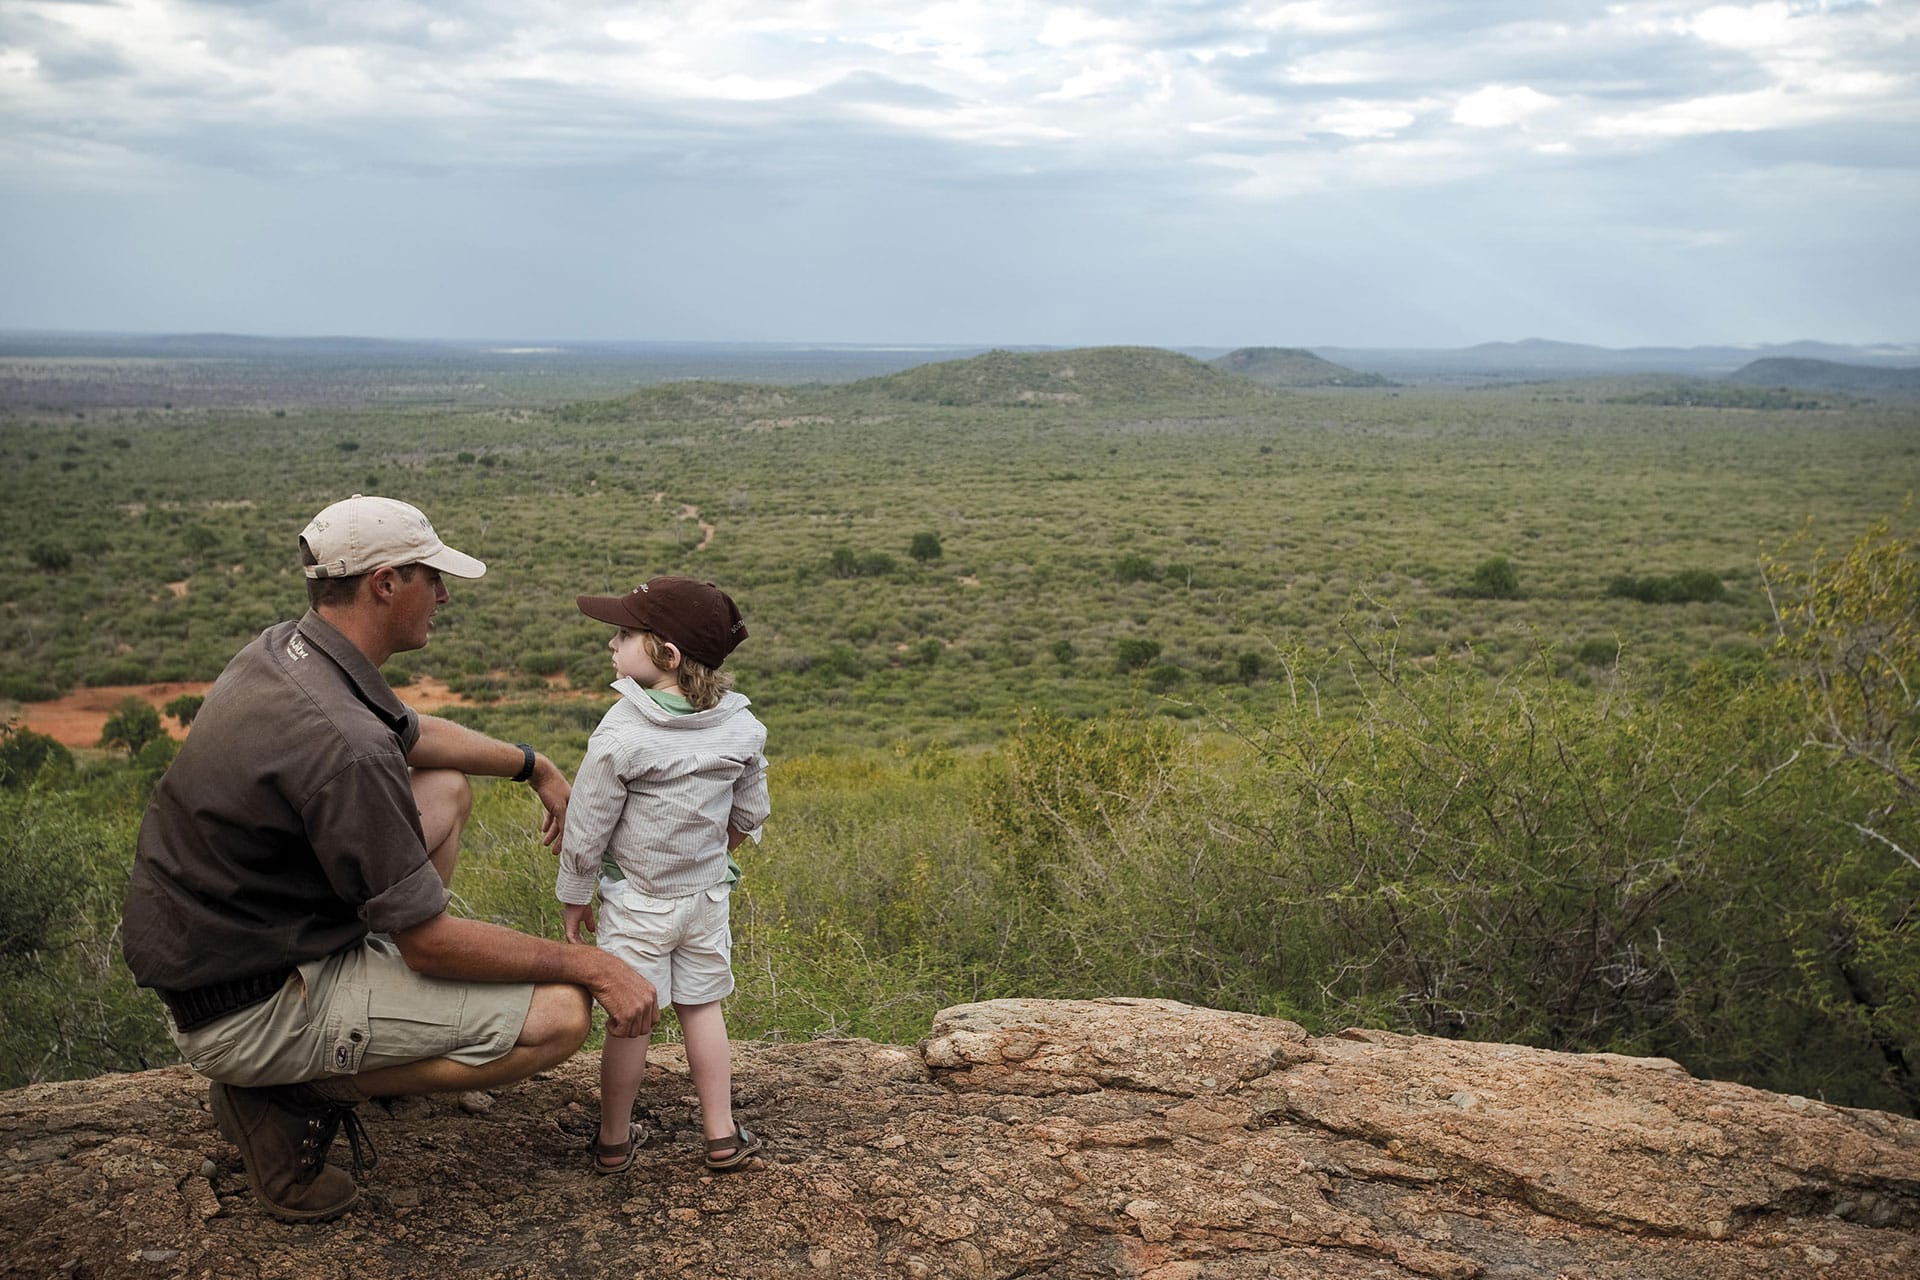 A ranger teaches a young guest during a malaria-free safari in south africa